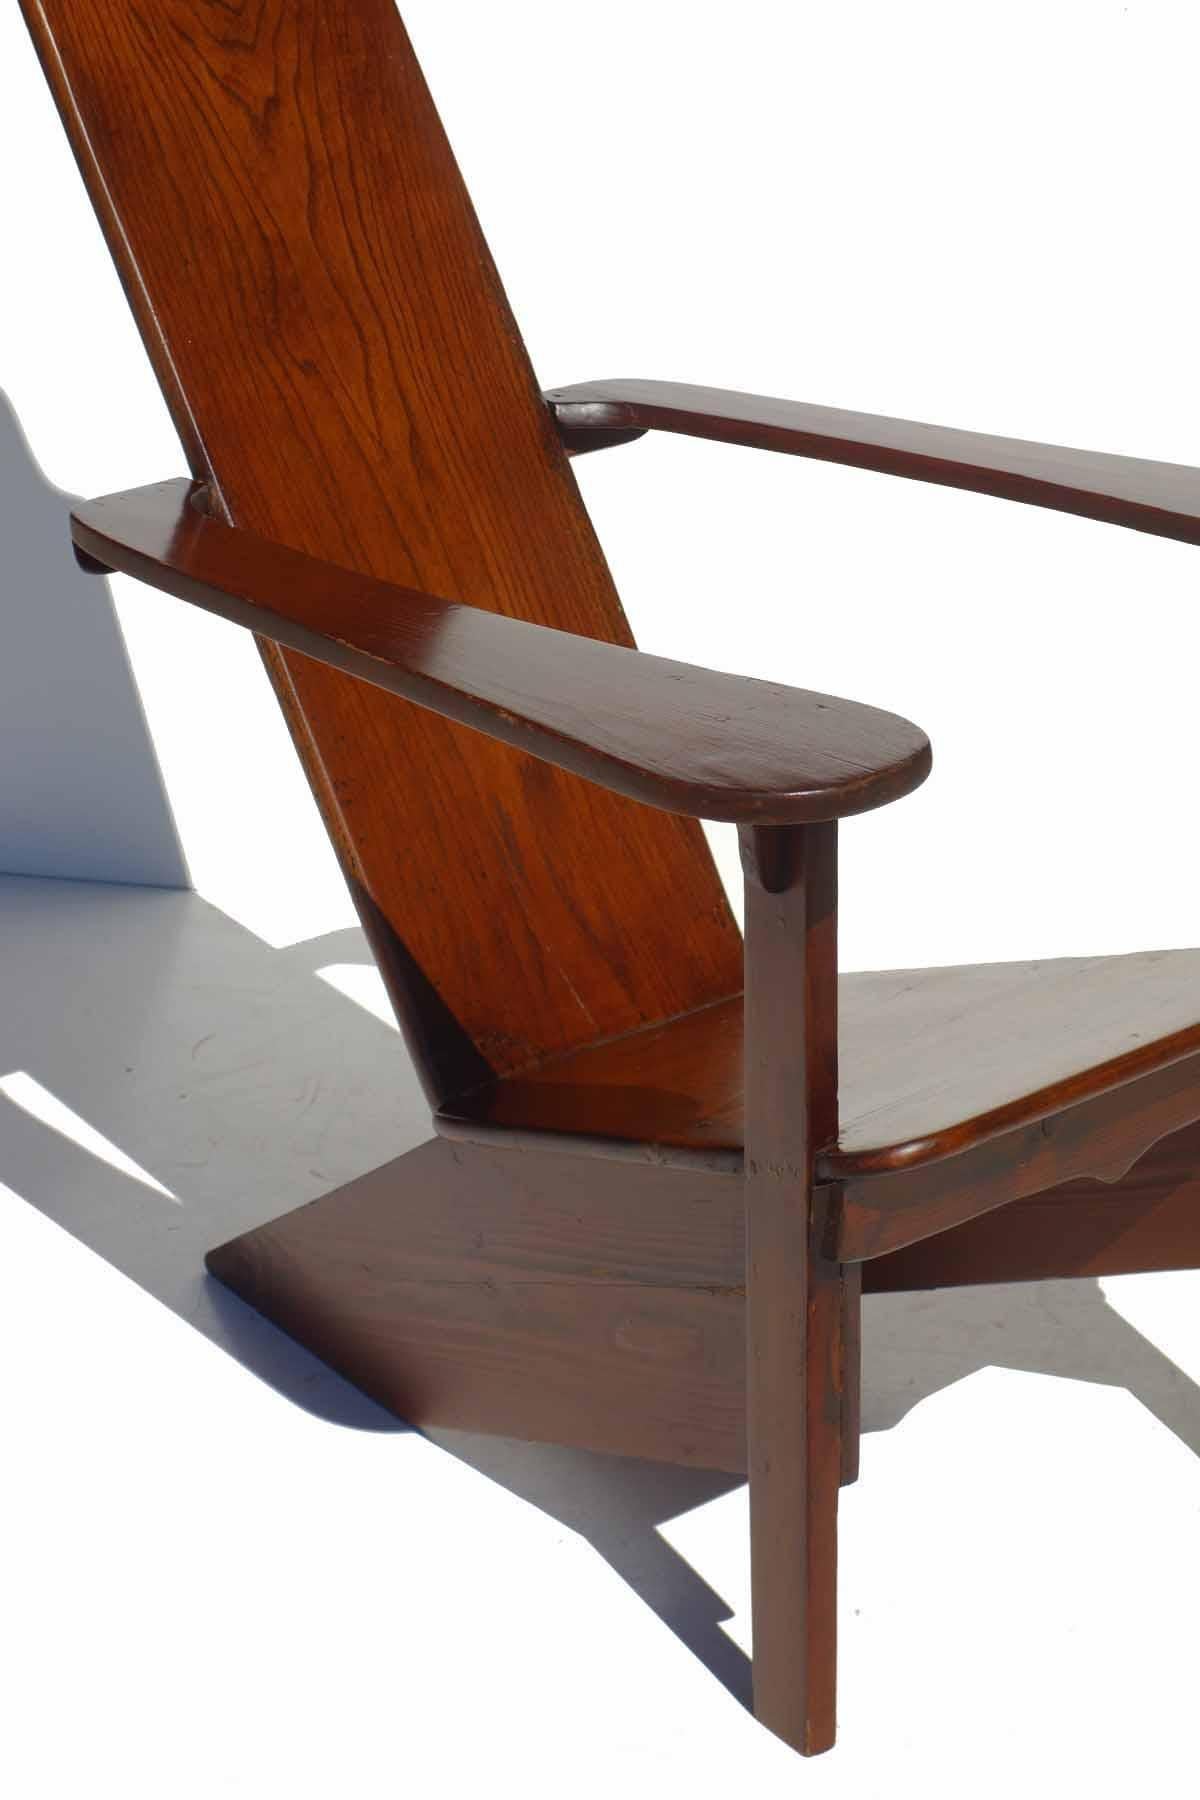 1930s Gino Levi Montalcini Italian Design Rationalist Wood Lounge Chair In Excellent Condition For Sale In Brescia, IT